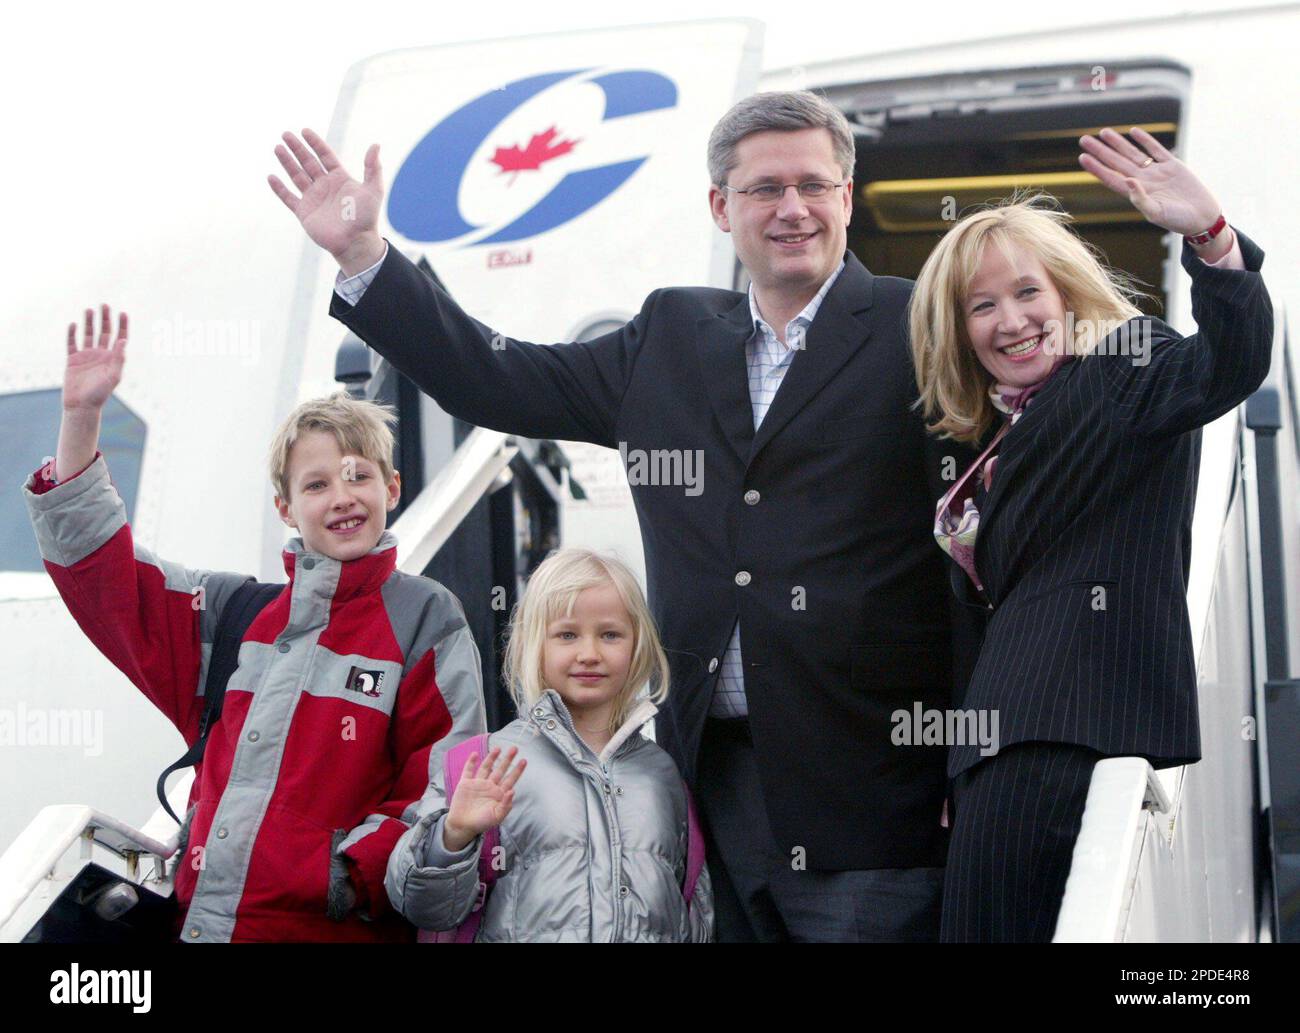 Conservative Leader and Prime Minister-designate Stephen Harper and his family, wife Laureen Teskey, right, and children Ben, left and Rachel, wave goodbye as they board their aircraft for Ottawa, in Calgary, Alberta, Canada on Tuesday Jan 24, 2006. (AP Photo/Canadian Press, Tom Hanson) Stock Photo